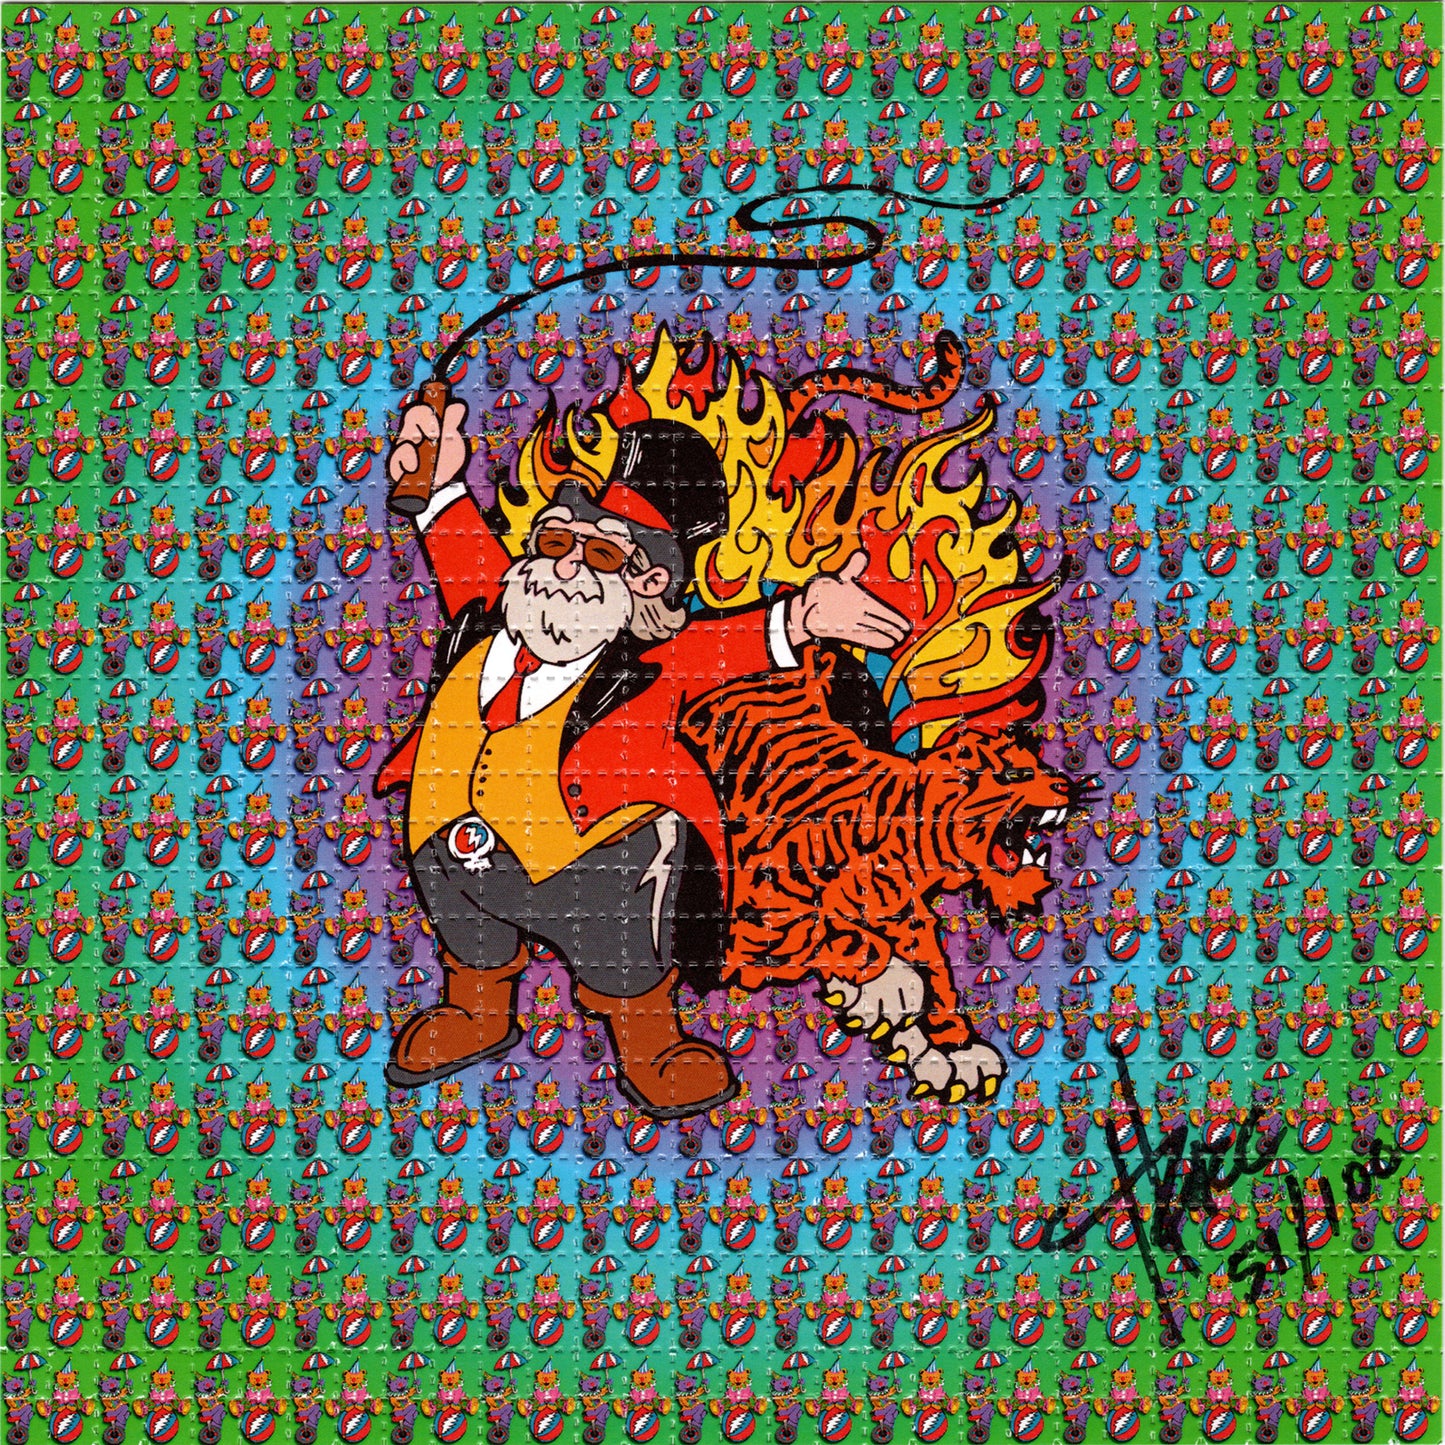 Jerry Circus by Hercules Platts Signed Limited Edition LSD blotter art print